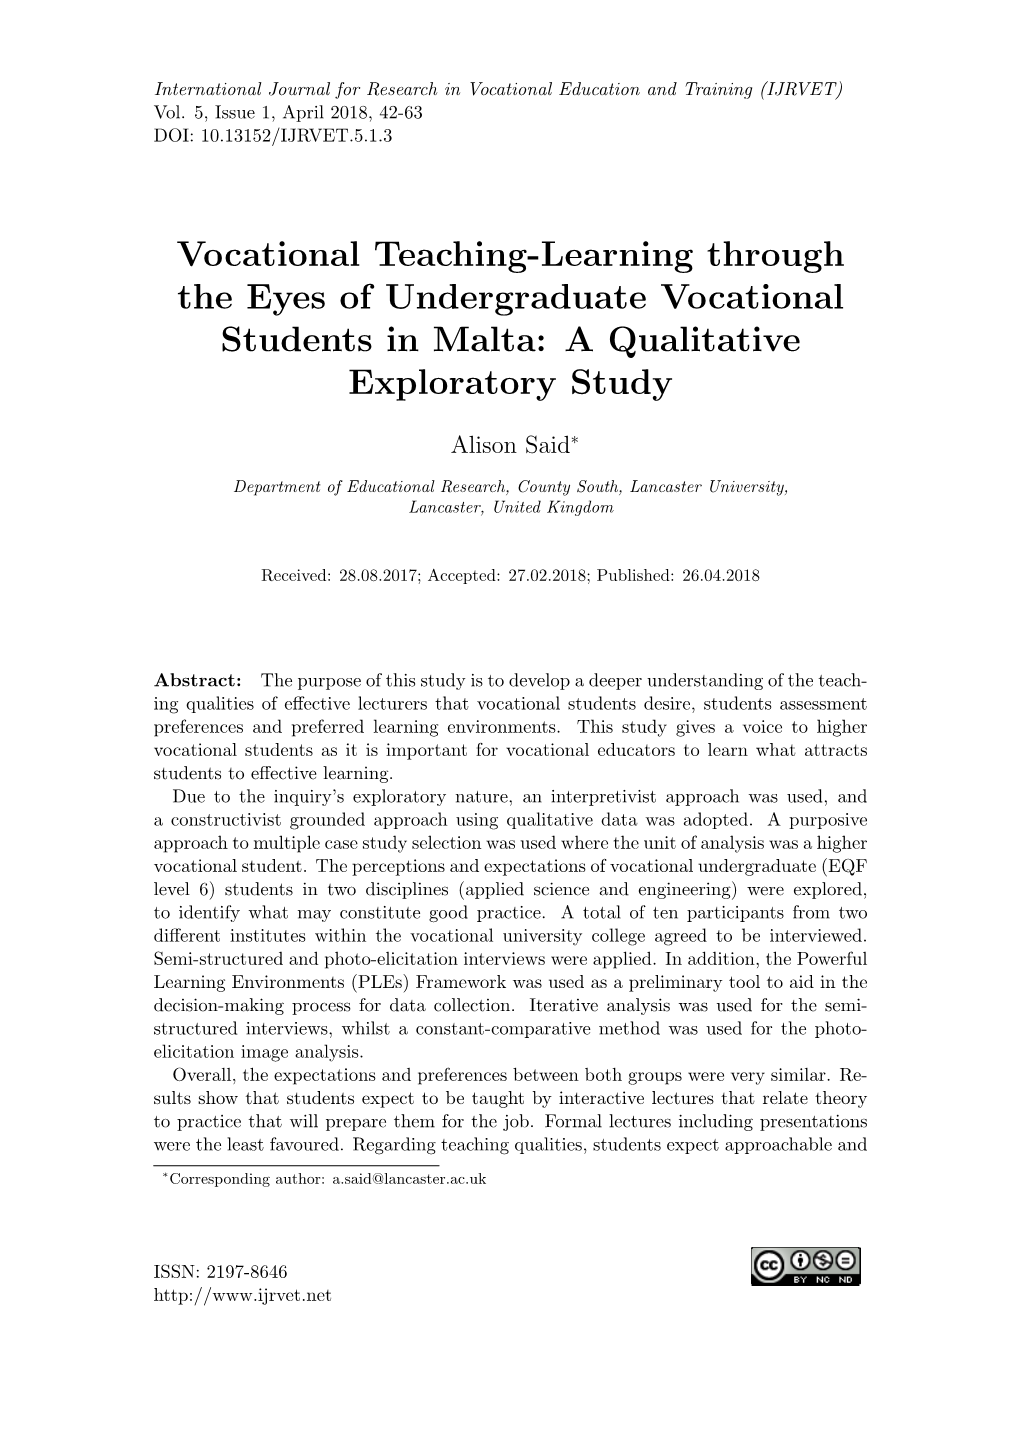 Vocational Teaching-Learning Through the Eyes of Undergraduate Vocational Students in Malta: a Qualitative Exploratory Study